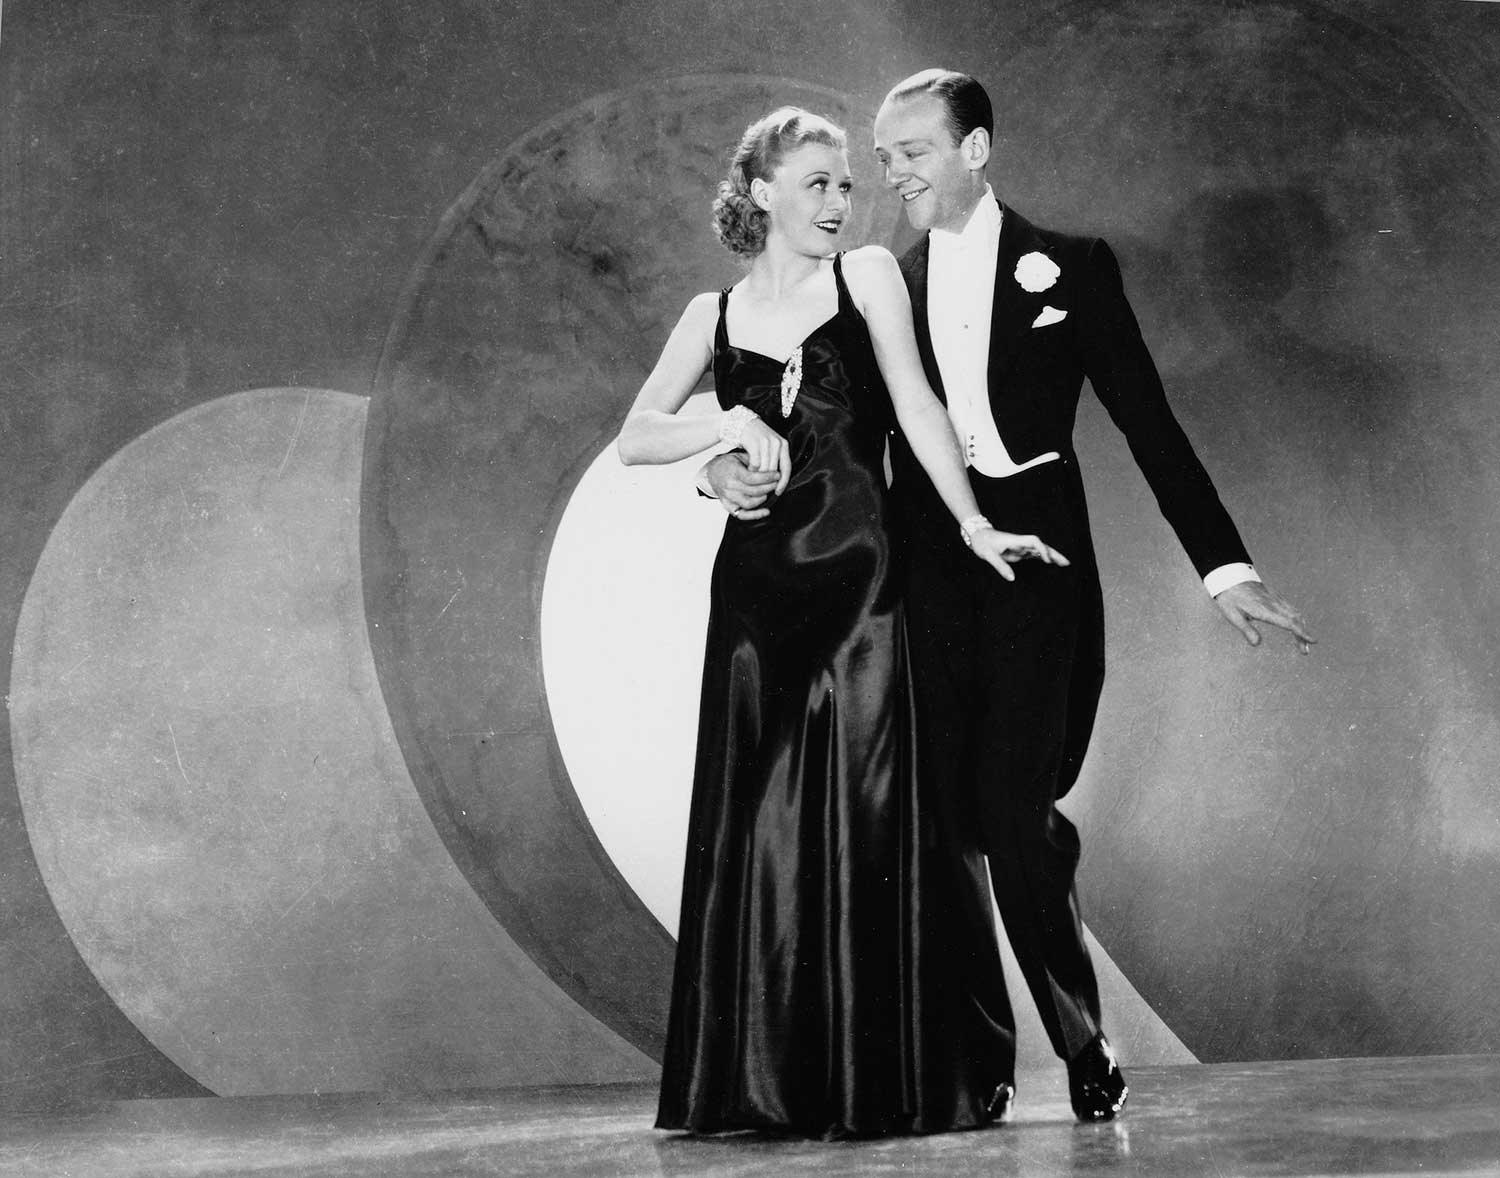 Fred Astaire and Ginger Rogers in the 1920s